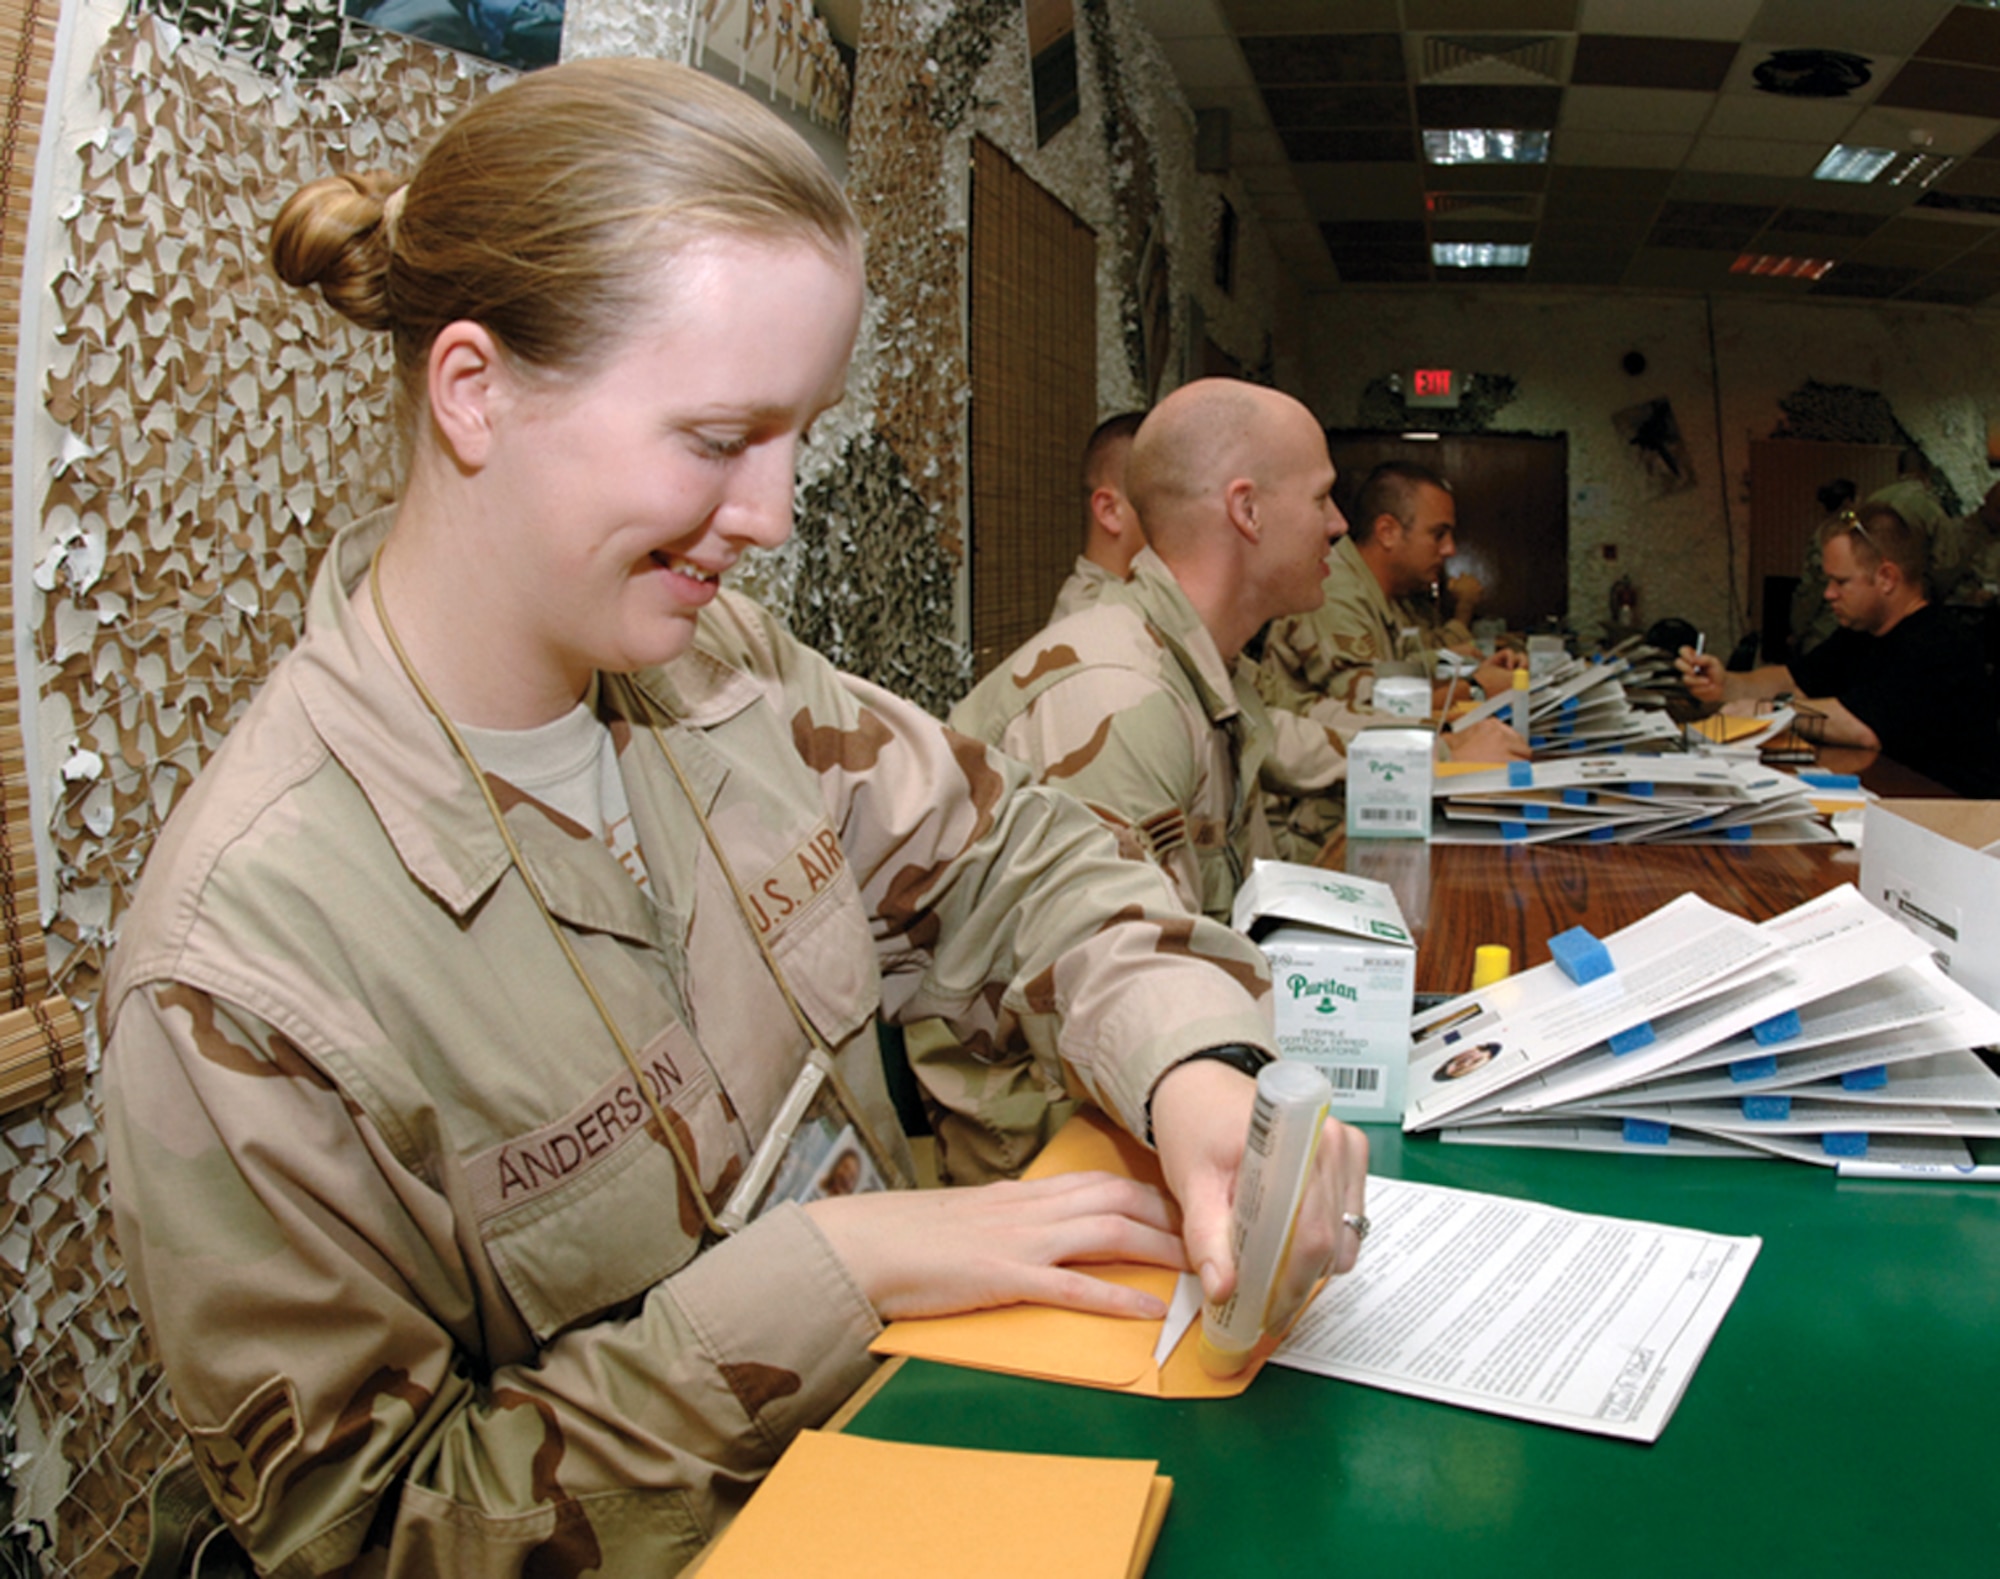 Airman 1st Class Christina Anderson seals a registration packet during a bone marrow donor registration drive at a forward operating base in Southwest Asia. The drive was organized by a deployed Airman in memory of her son, who lost his battle with acute lymphoblastic leukemia last September. The drive drew 685 new registrants to the national donor registry. Airman Anderson is with the 379th Air Expeditionary Wing. (U.S. Air Force photo/Master Sgt. Douglas Lingefelt)